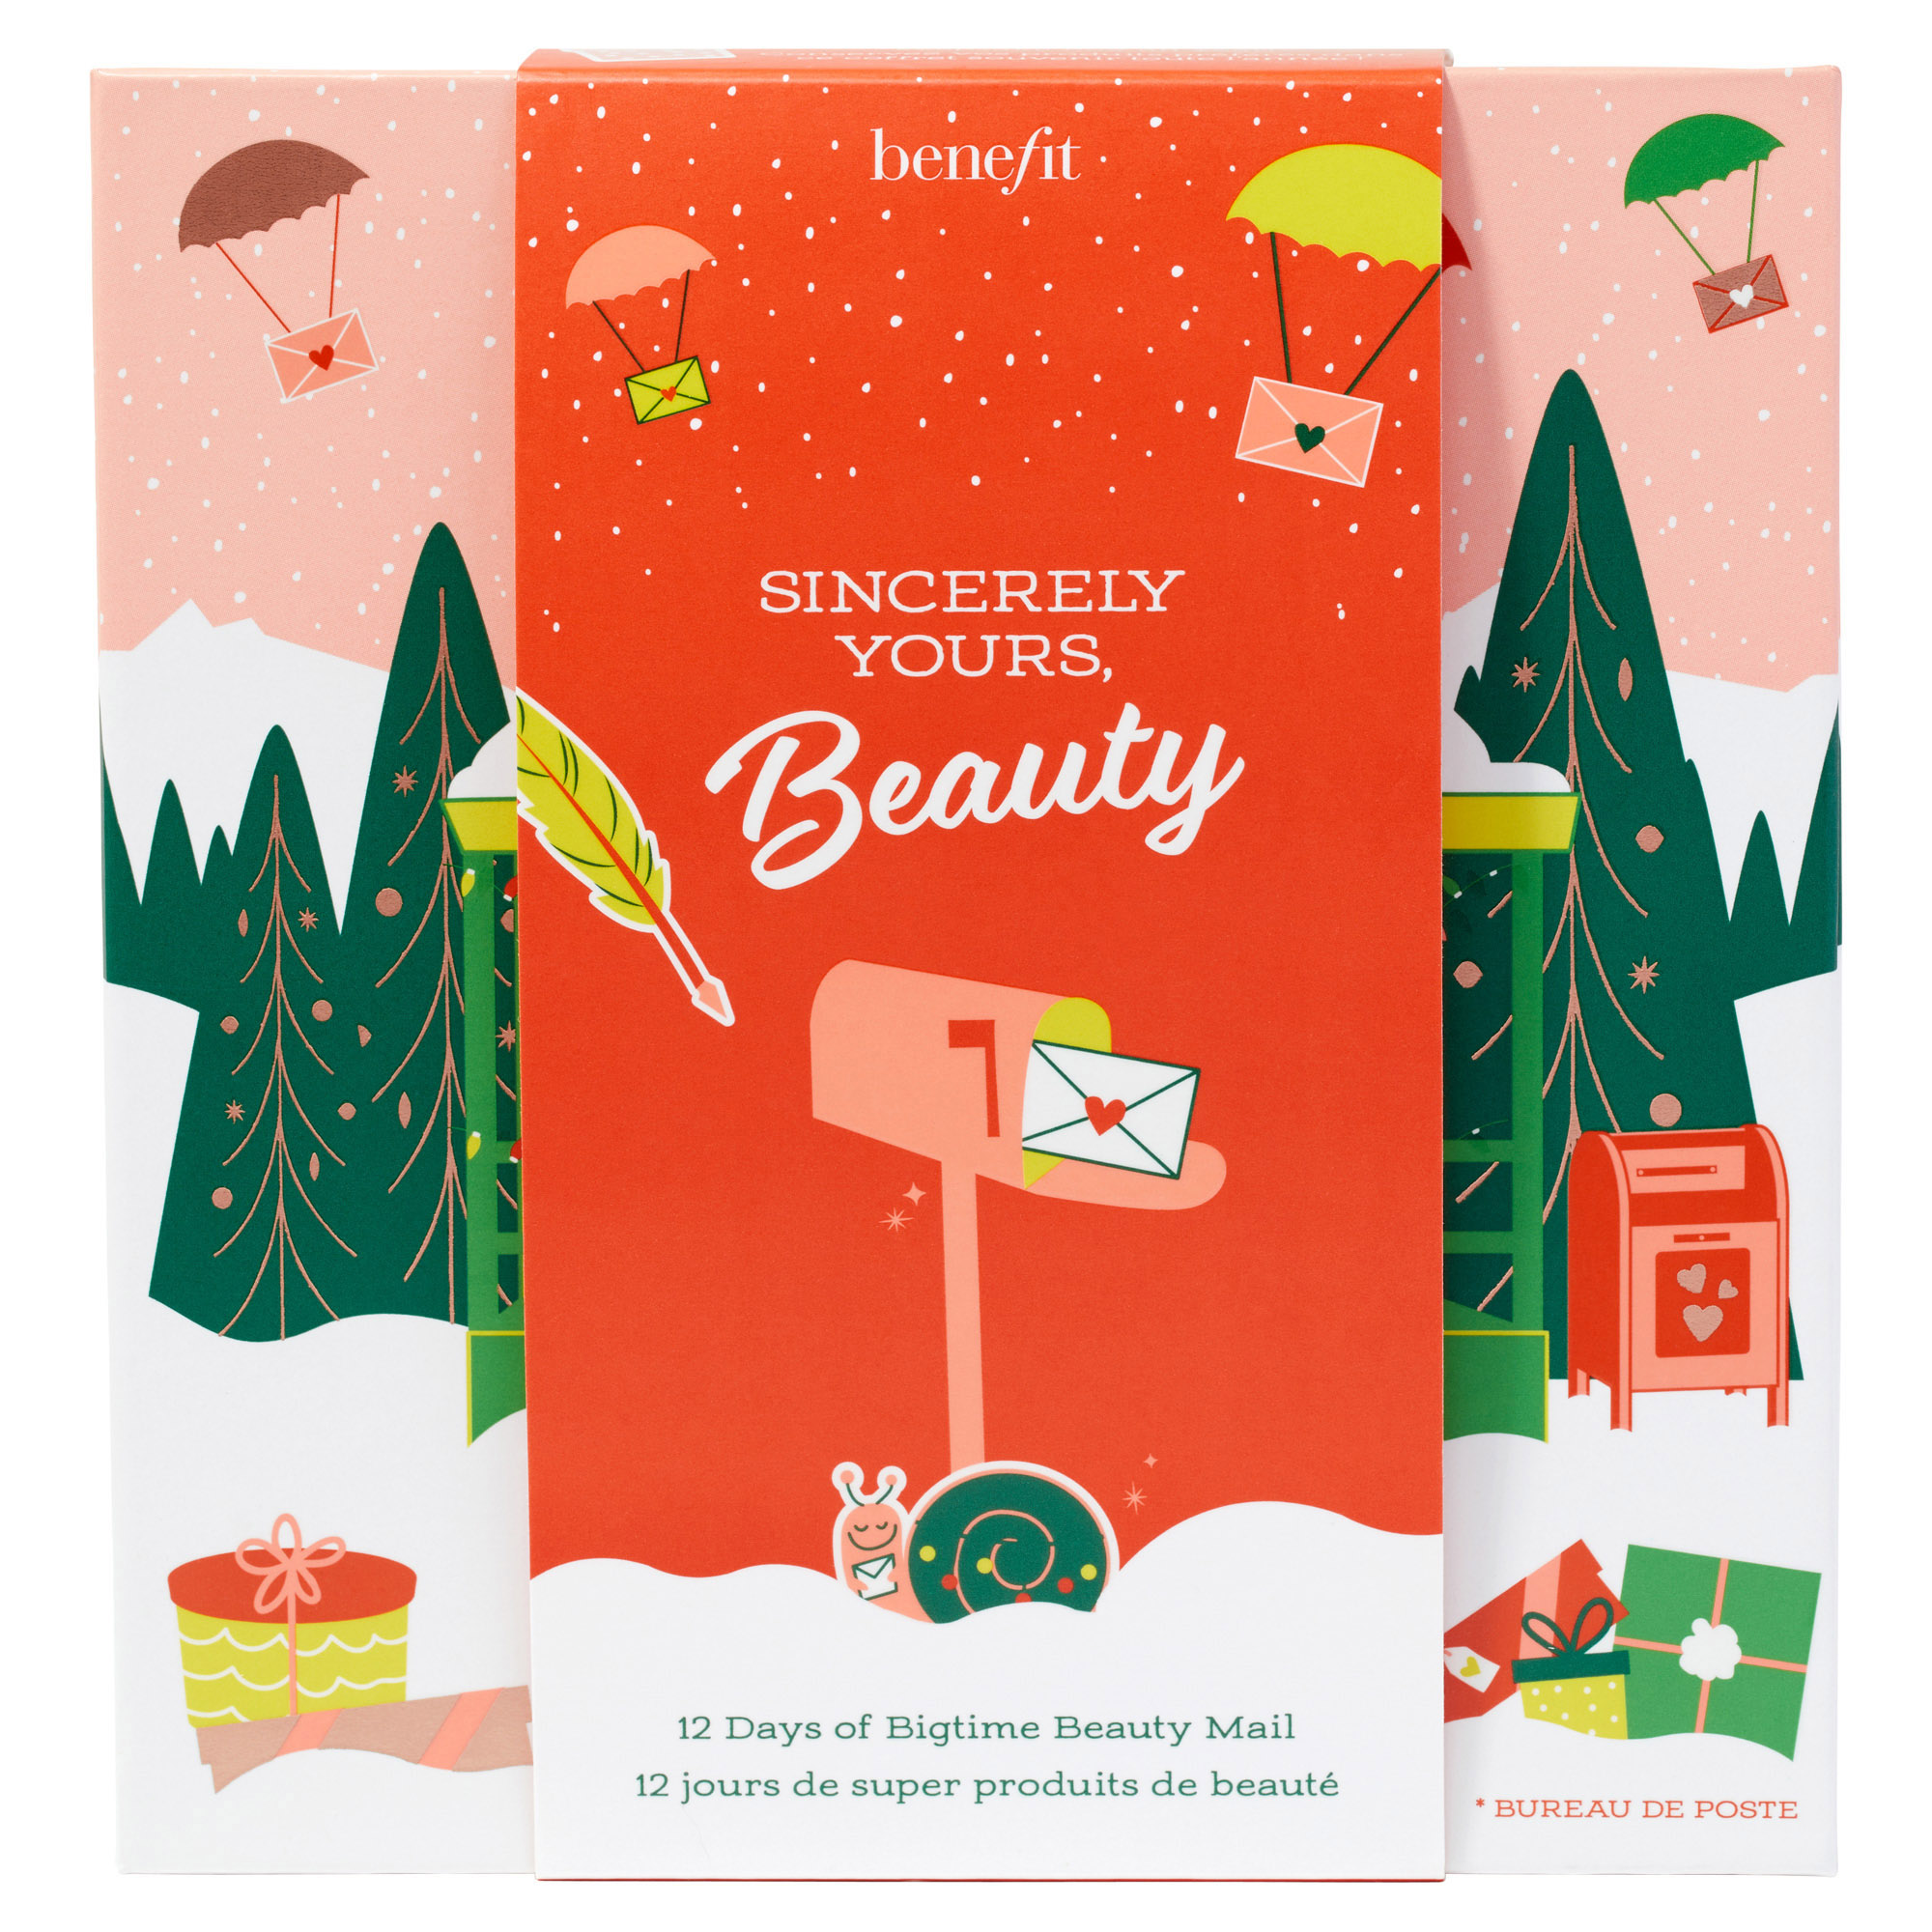 Benefit Sincerely Yours advent calendar